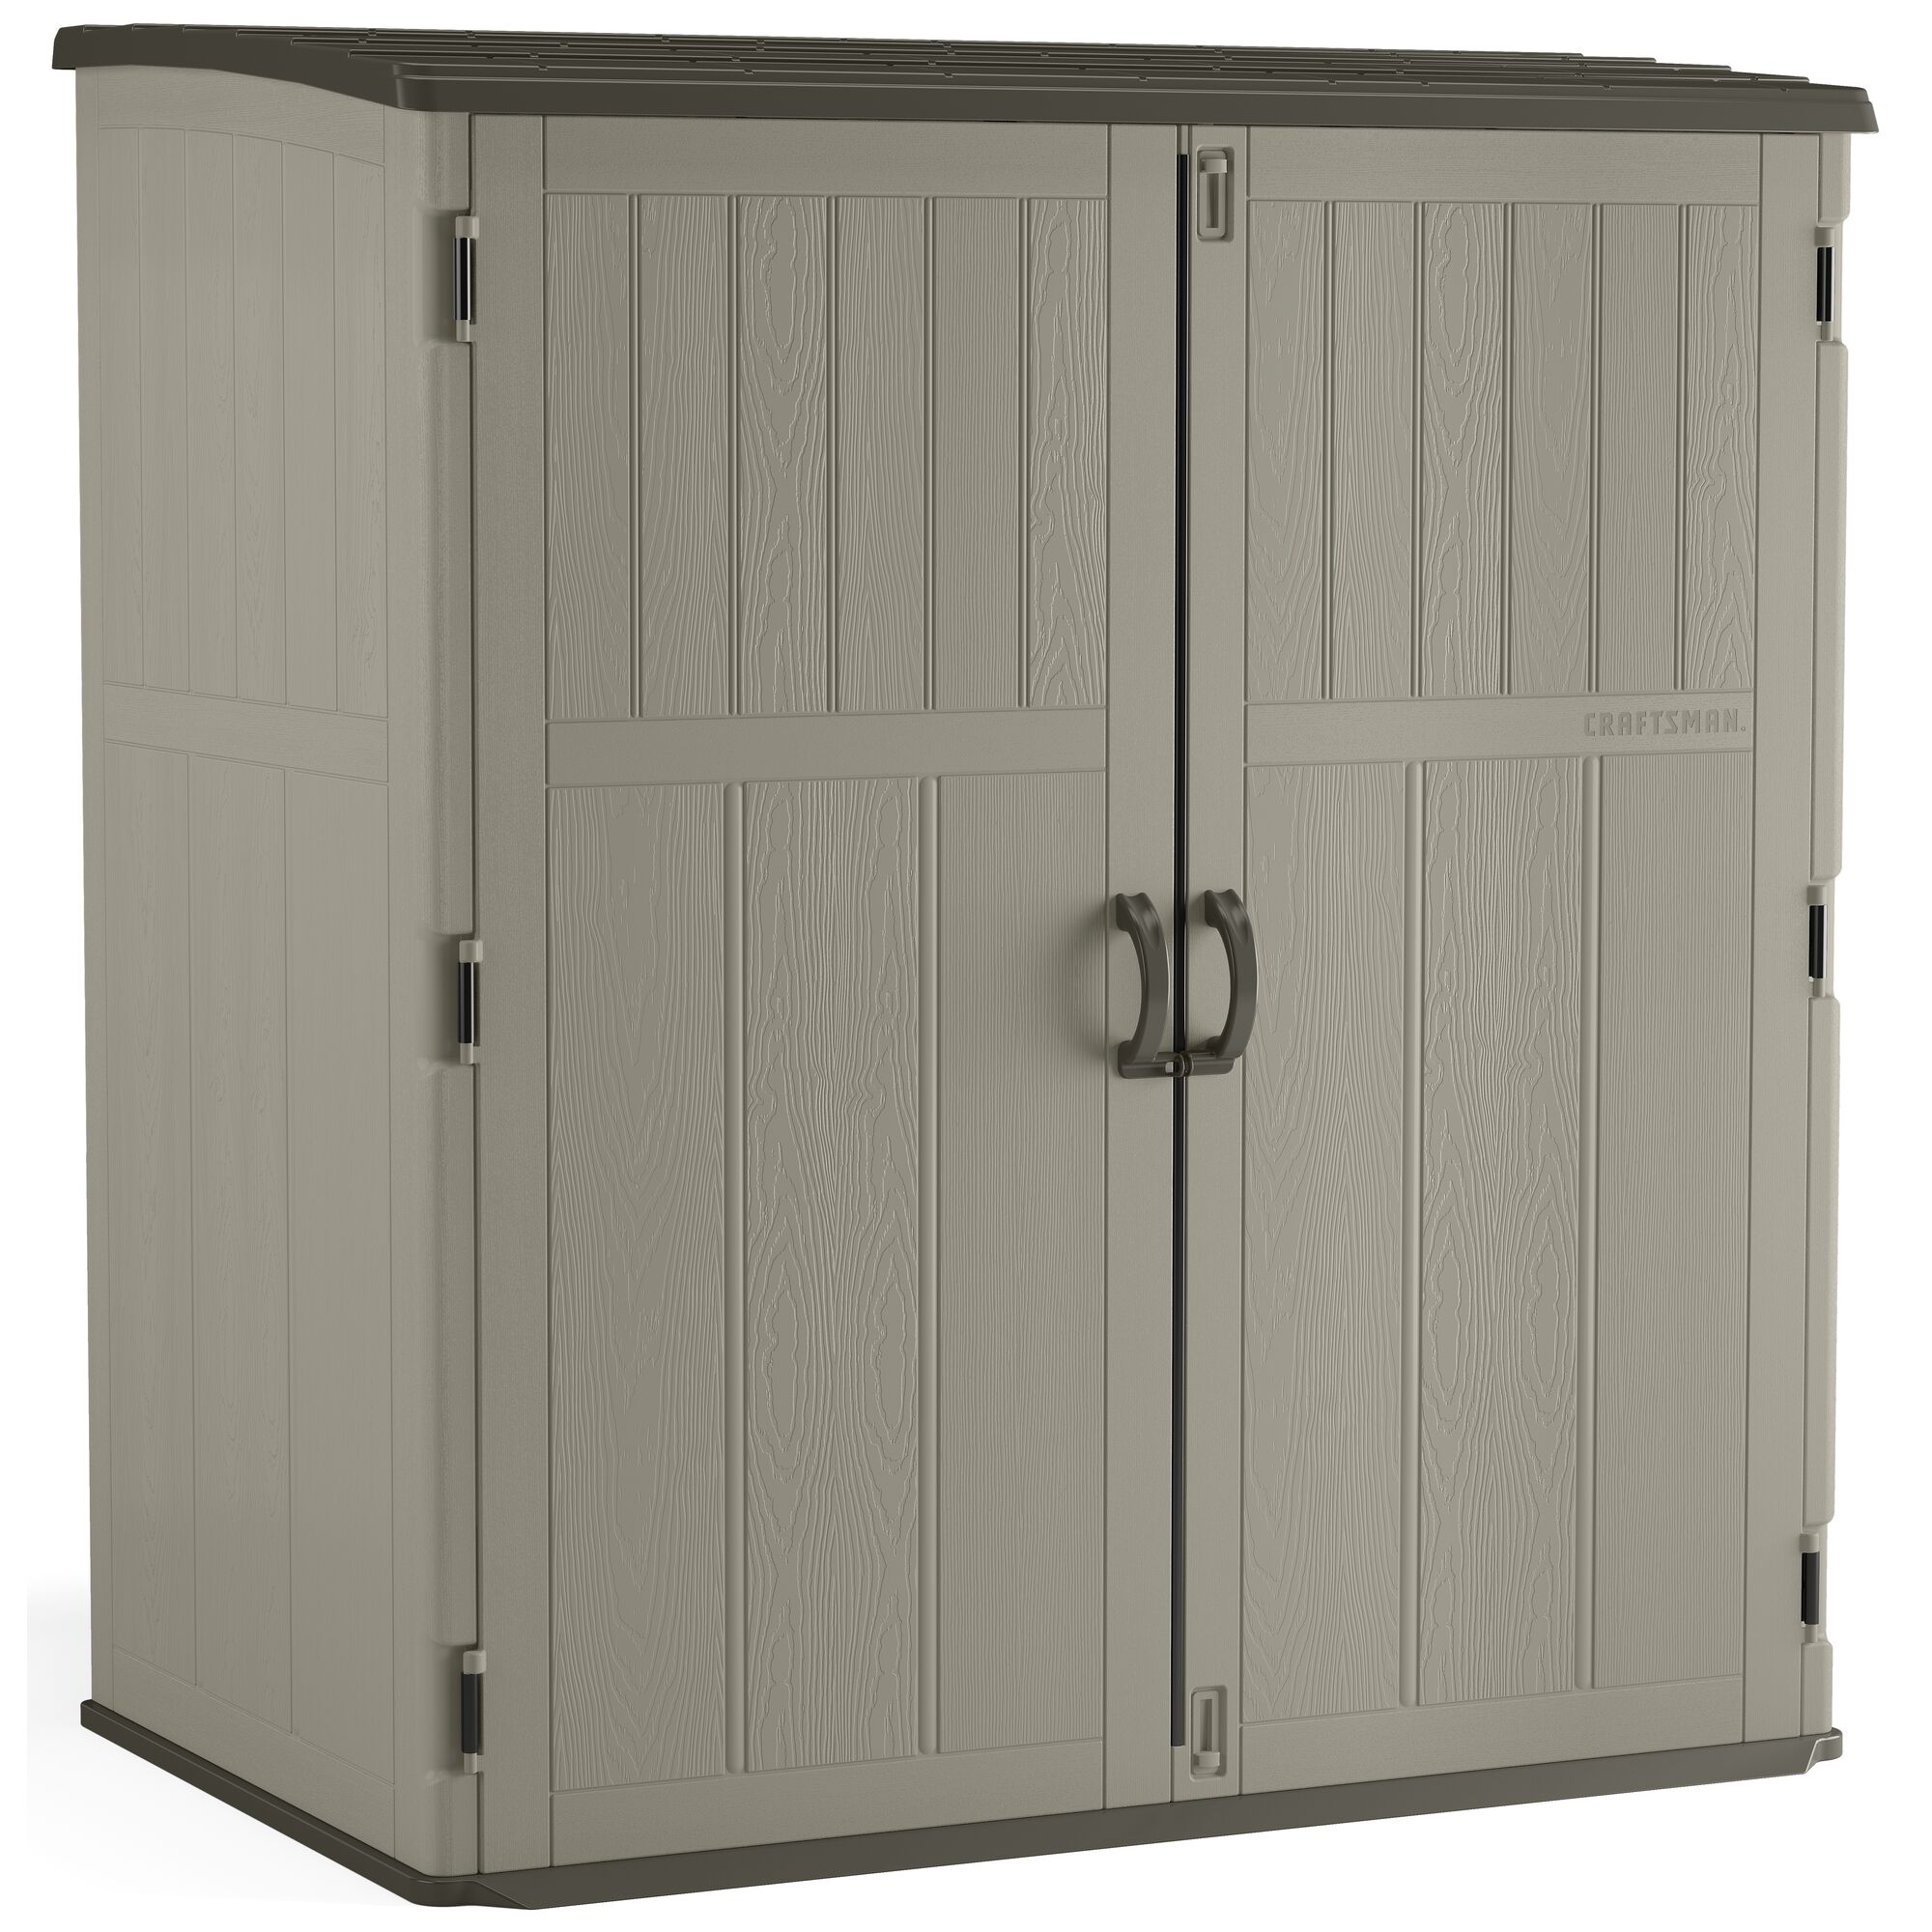 Profile of Extra large vertical storage shed.